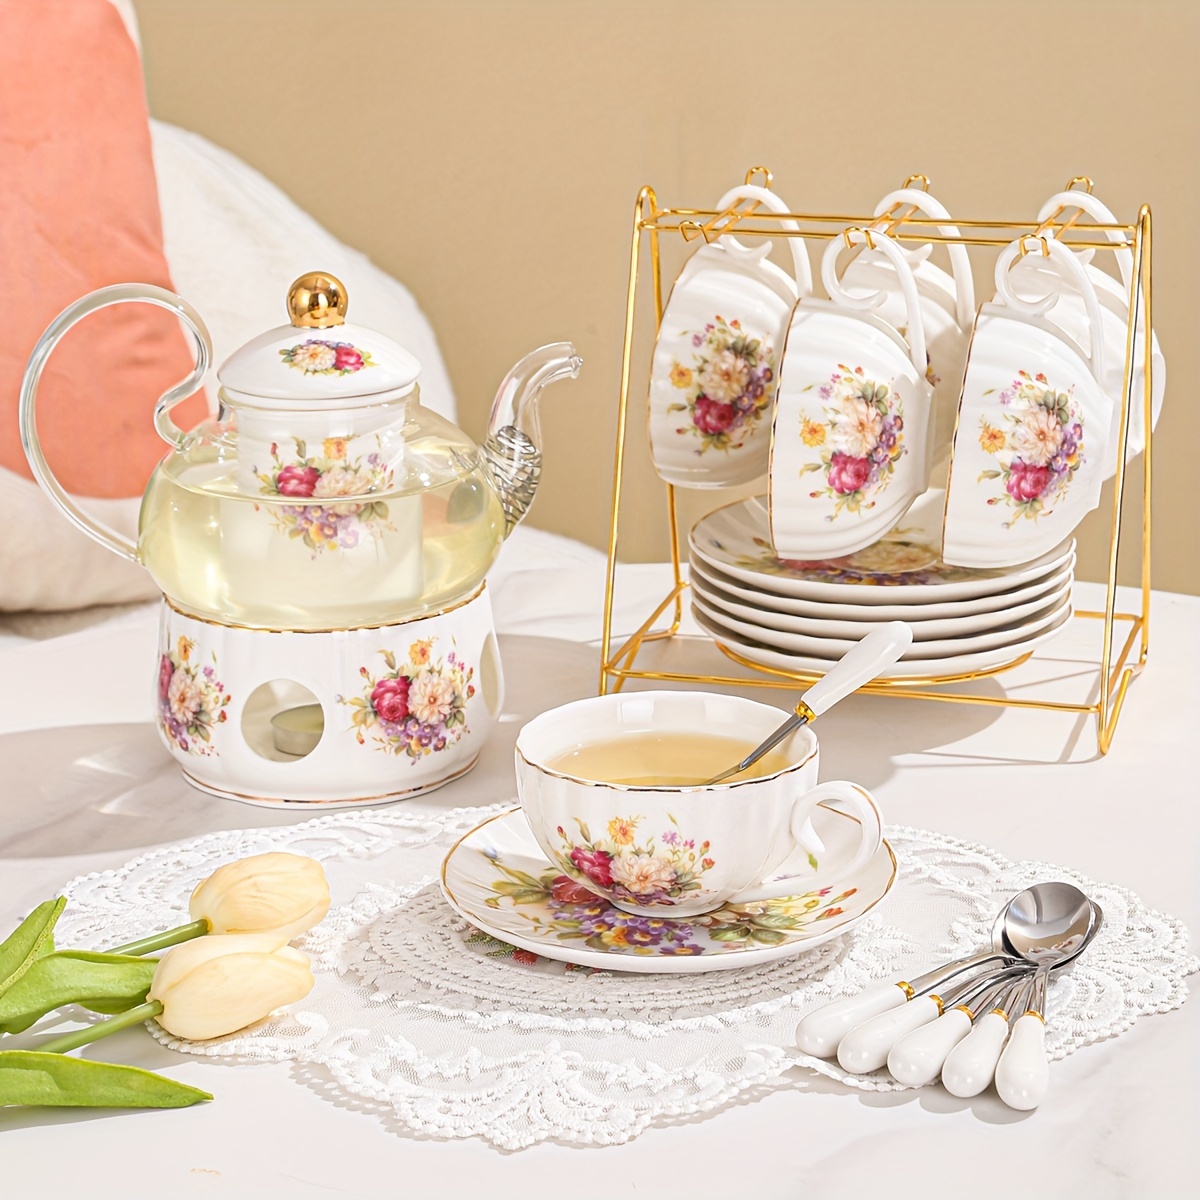 Traditional antique tea pot English culture afternoon tea with hot